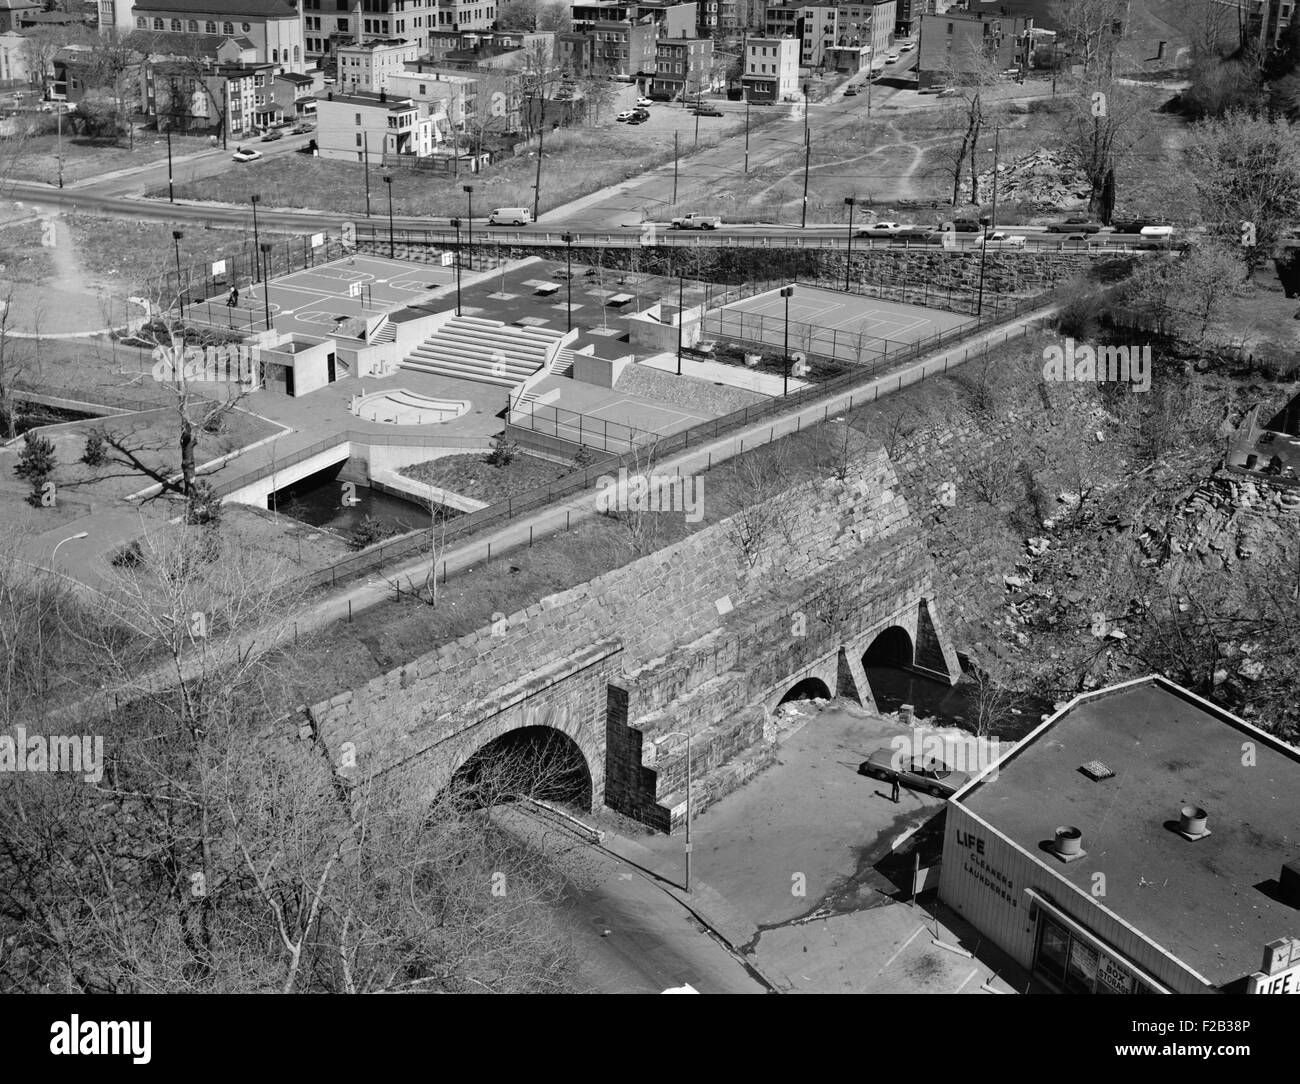 Yonkers, New York, ca. 1980. Aerial view showing Old Croton Aqueduct was opening in 1842 transporting water from Upstate Reservoir to New York City. At the Saw Mill River Culvert spanning Nepperhan Avenue. (BSLOC 2015 11 4) Stock Photo